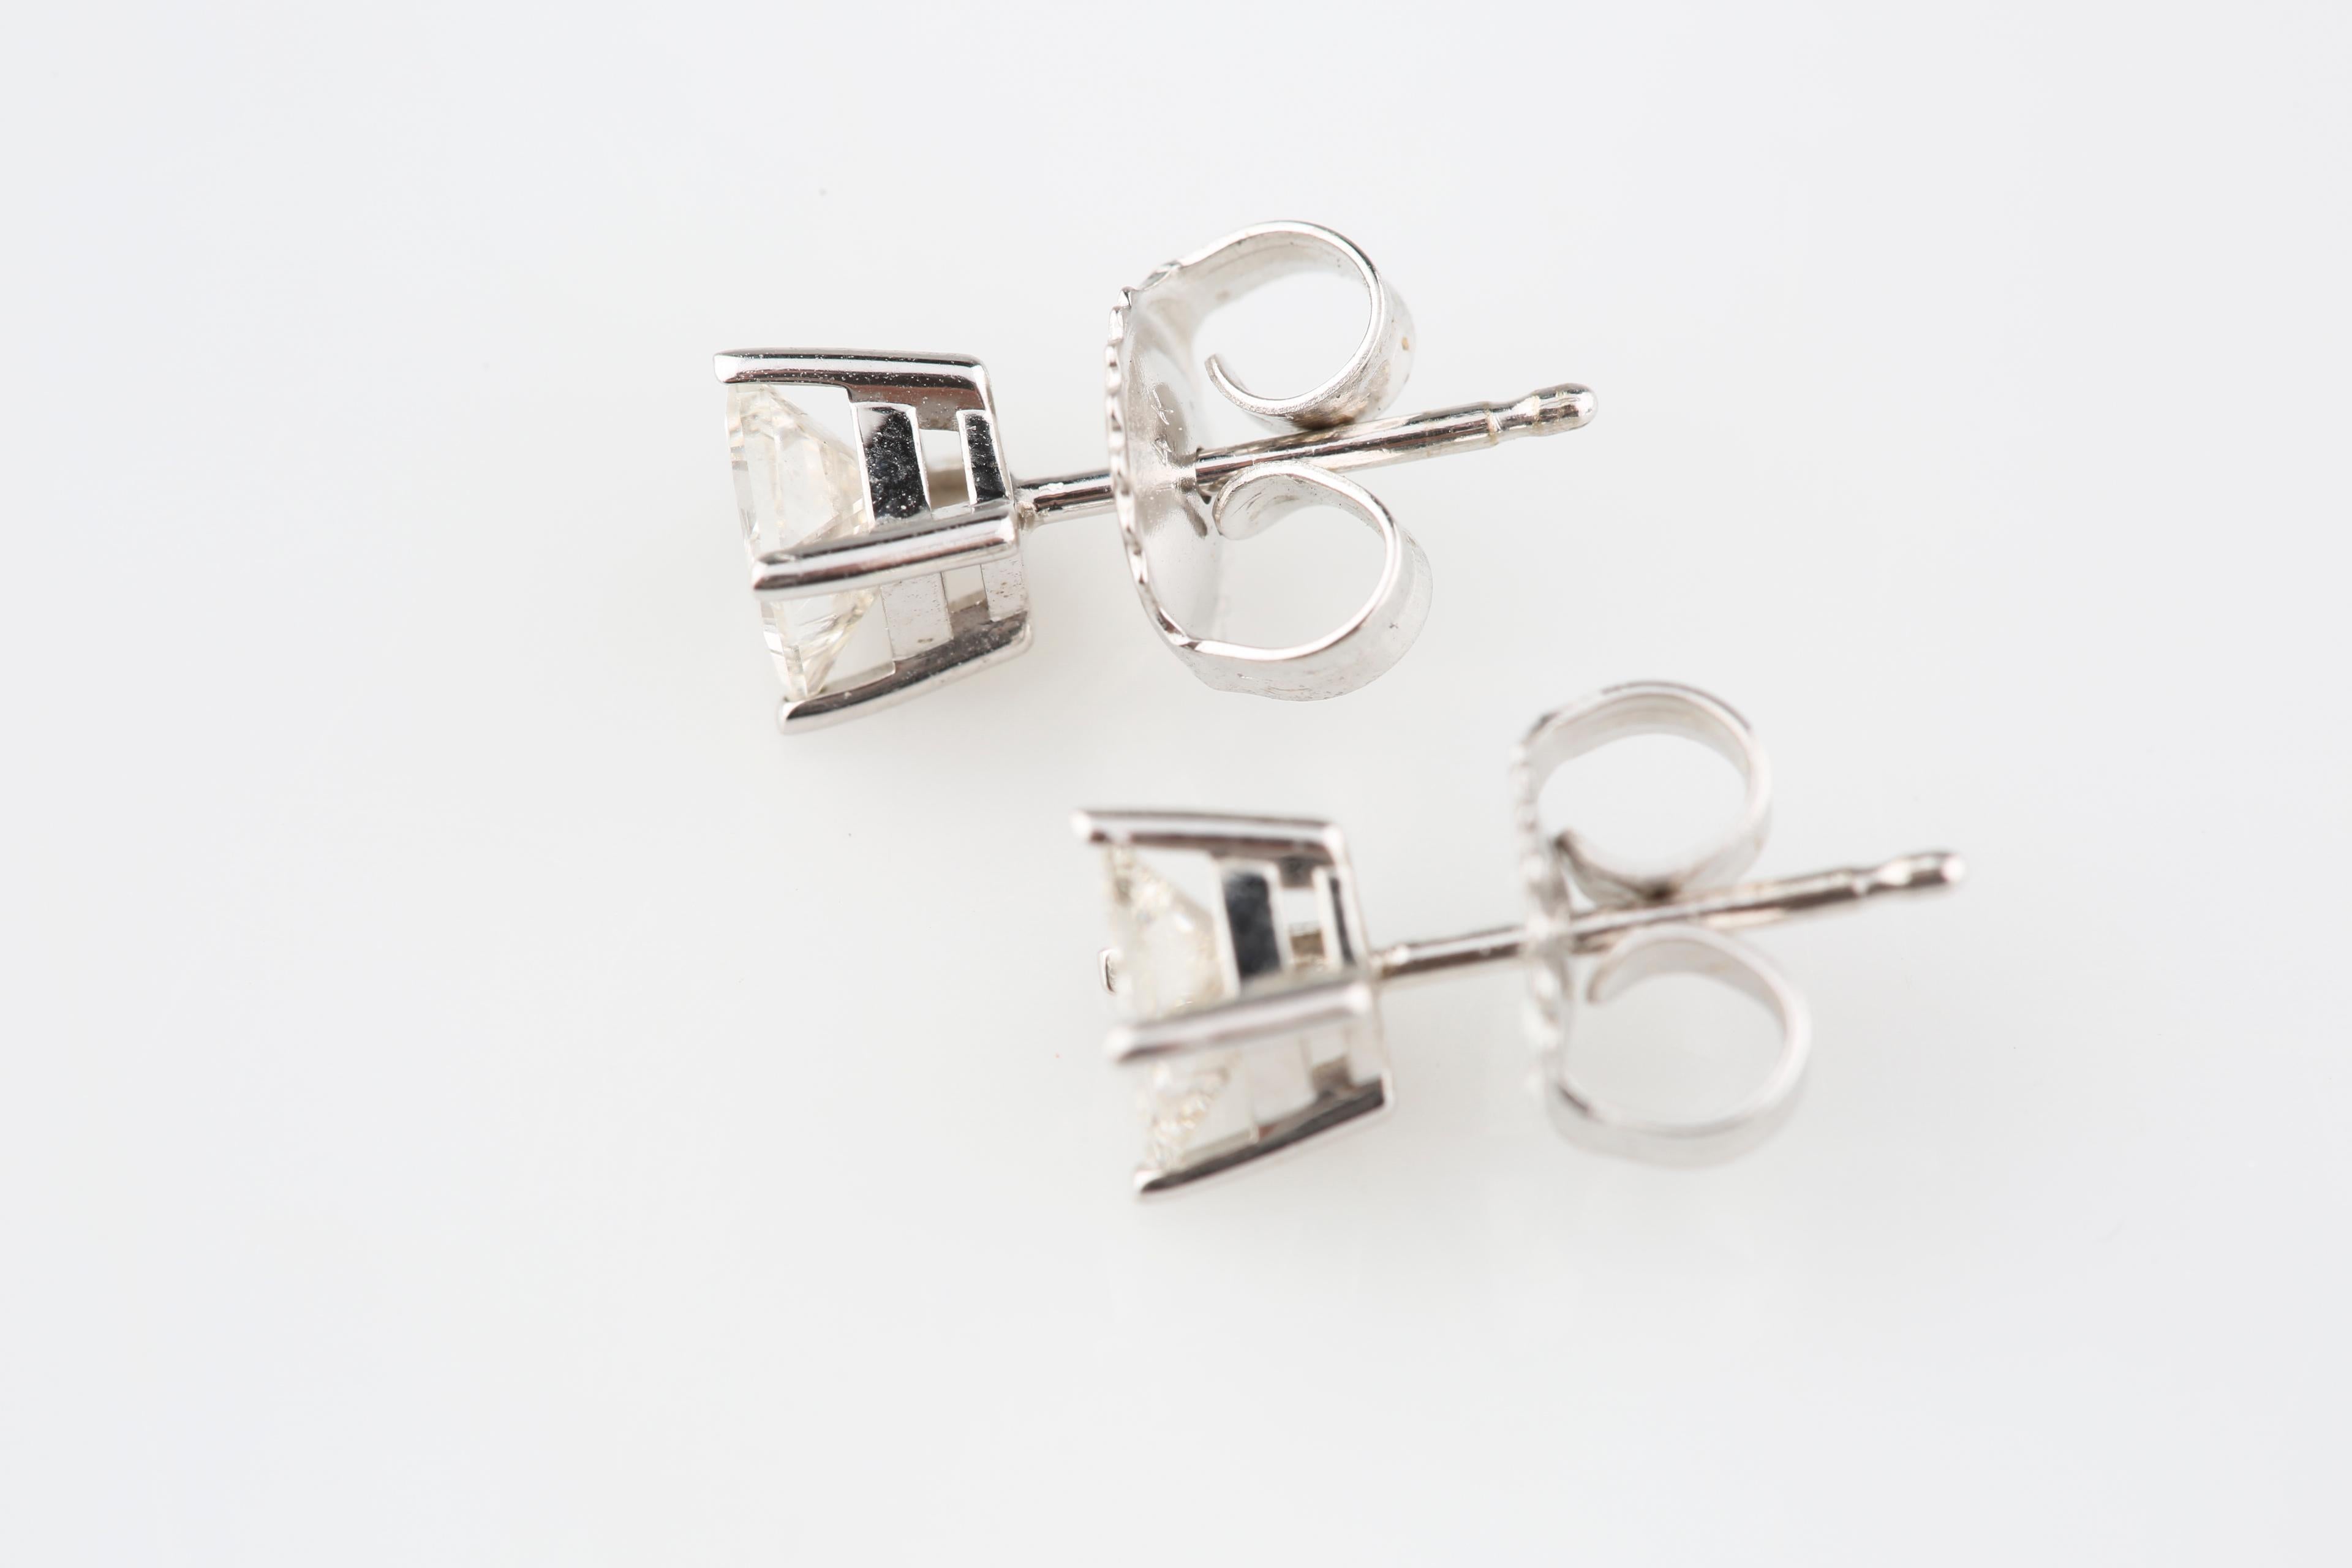 Beautiful Princess Cut Diamond Stud Earrings
Four-Prong 14k White Gold Screwback Settings
Total Diamond Weight = 0.61 cts
Average Color = I
Average Clarity = SI3
NOTE: One diamond has minor chip.
Total Mass = 1.1 grams
Gorgeous Gift!